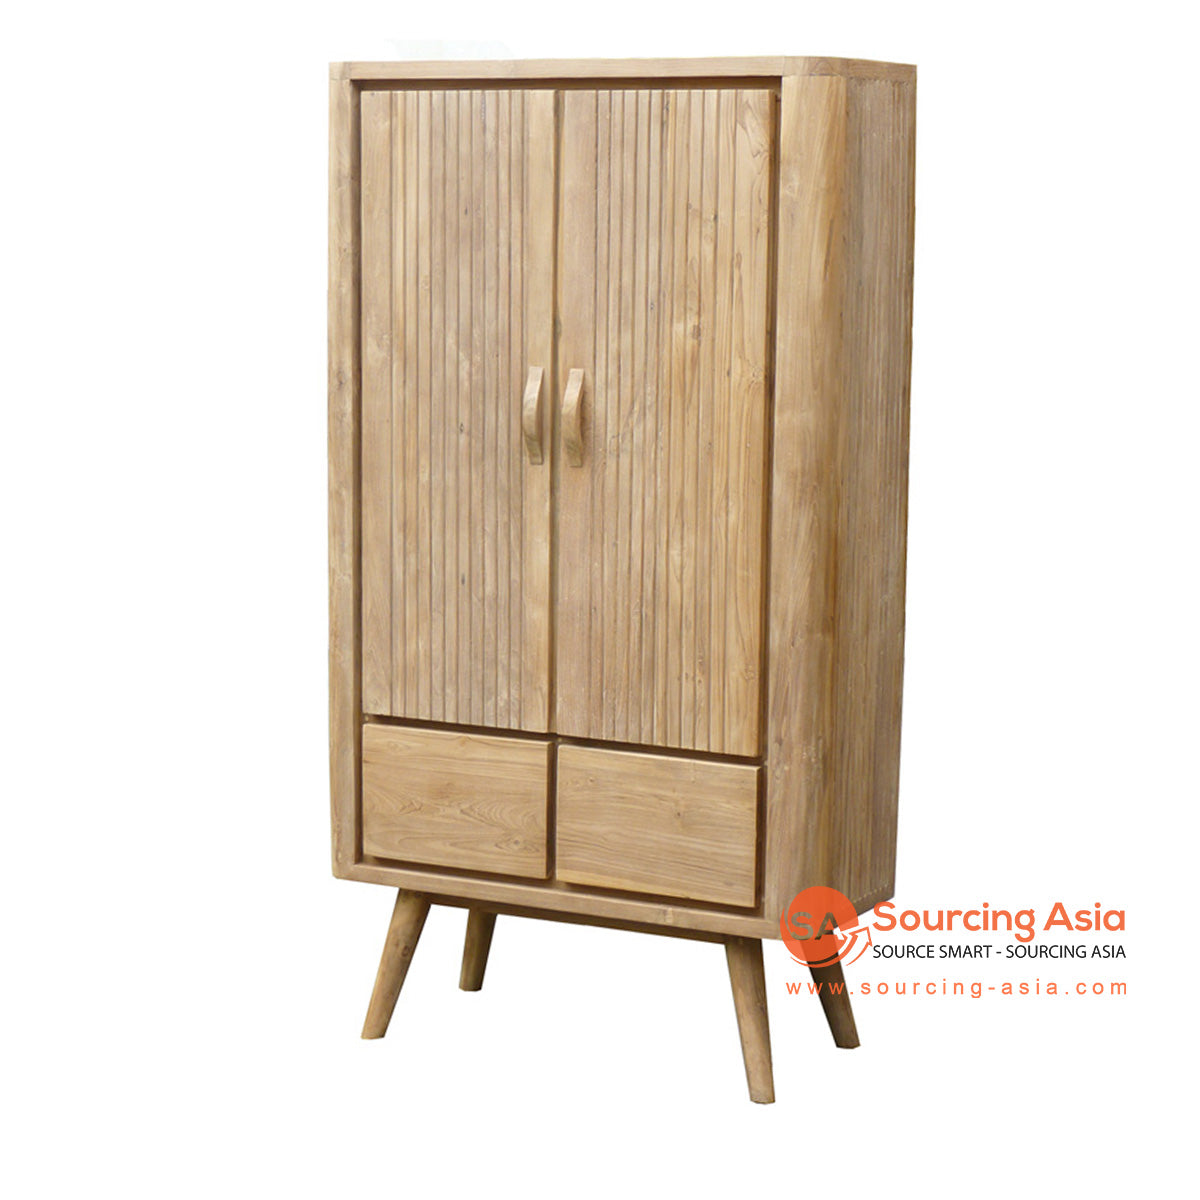 ECL307 NATURAL RECYCLED TEAK WOOD HAVANA CABINET WITH LEGS